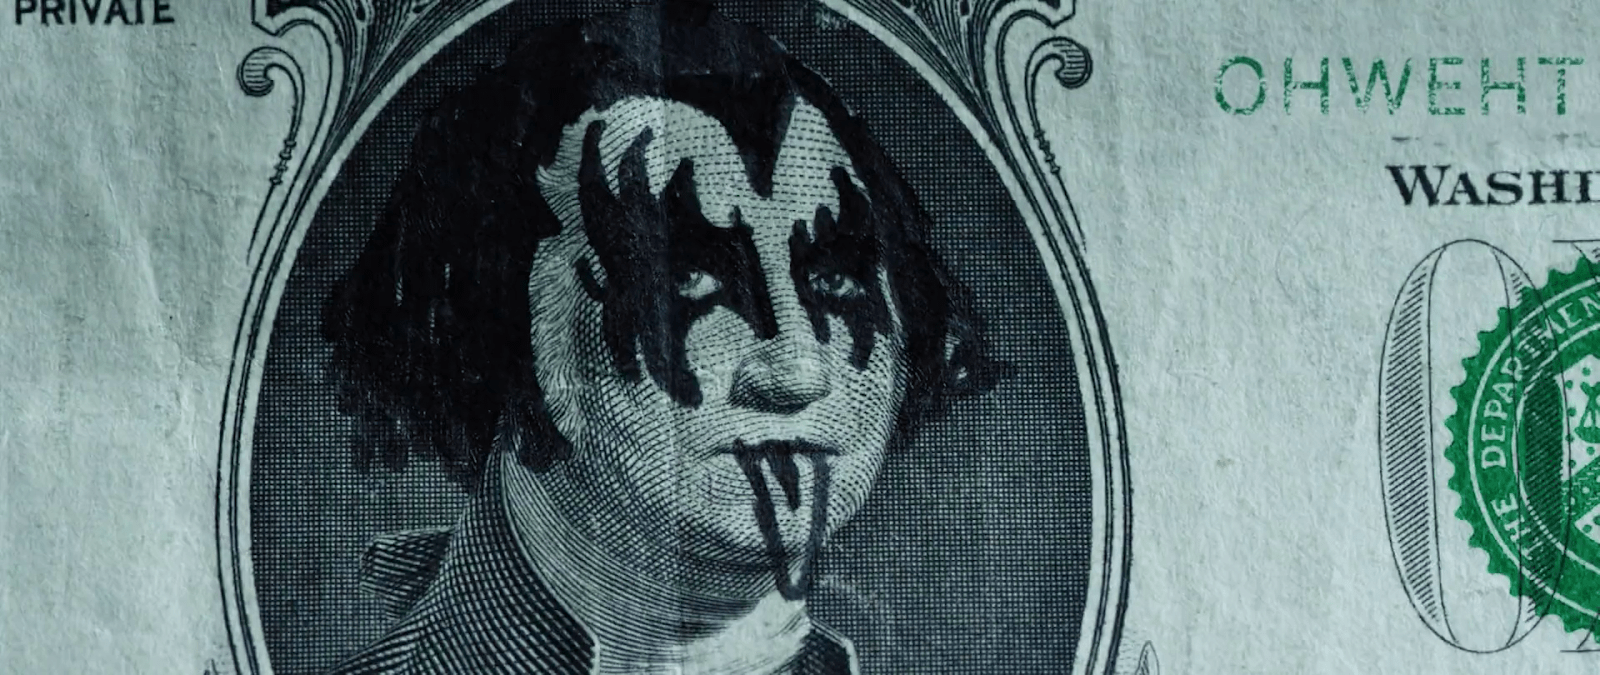 George Washington disguised as Kiss on a dollar to illustrate the new sources of income for artists